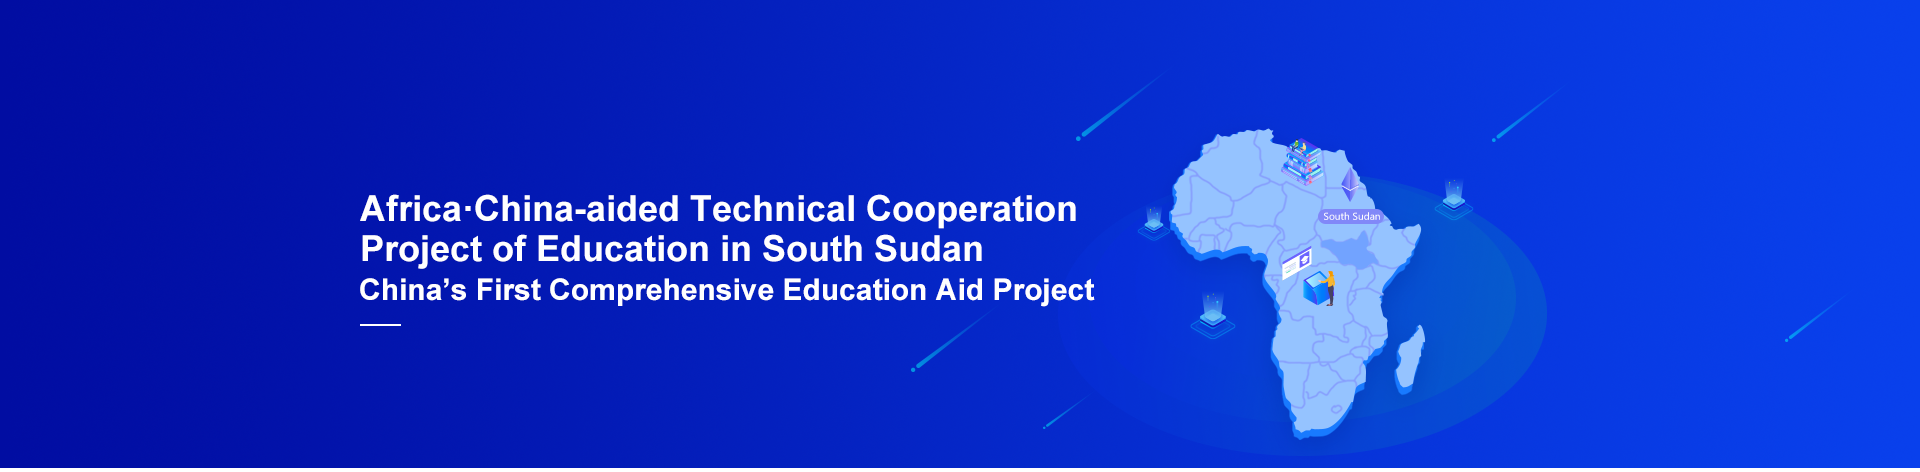 Africa·China-aided Technical Cooperation Project of Education in South Sudan